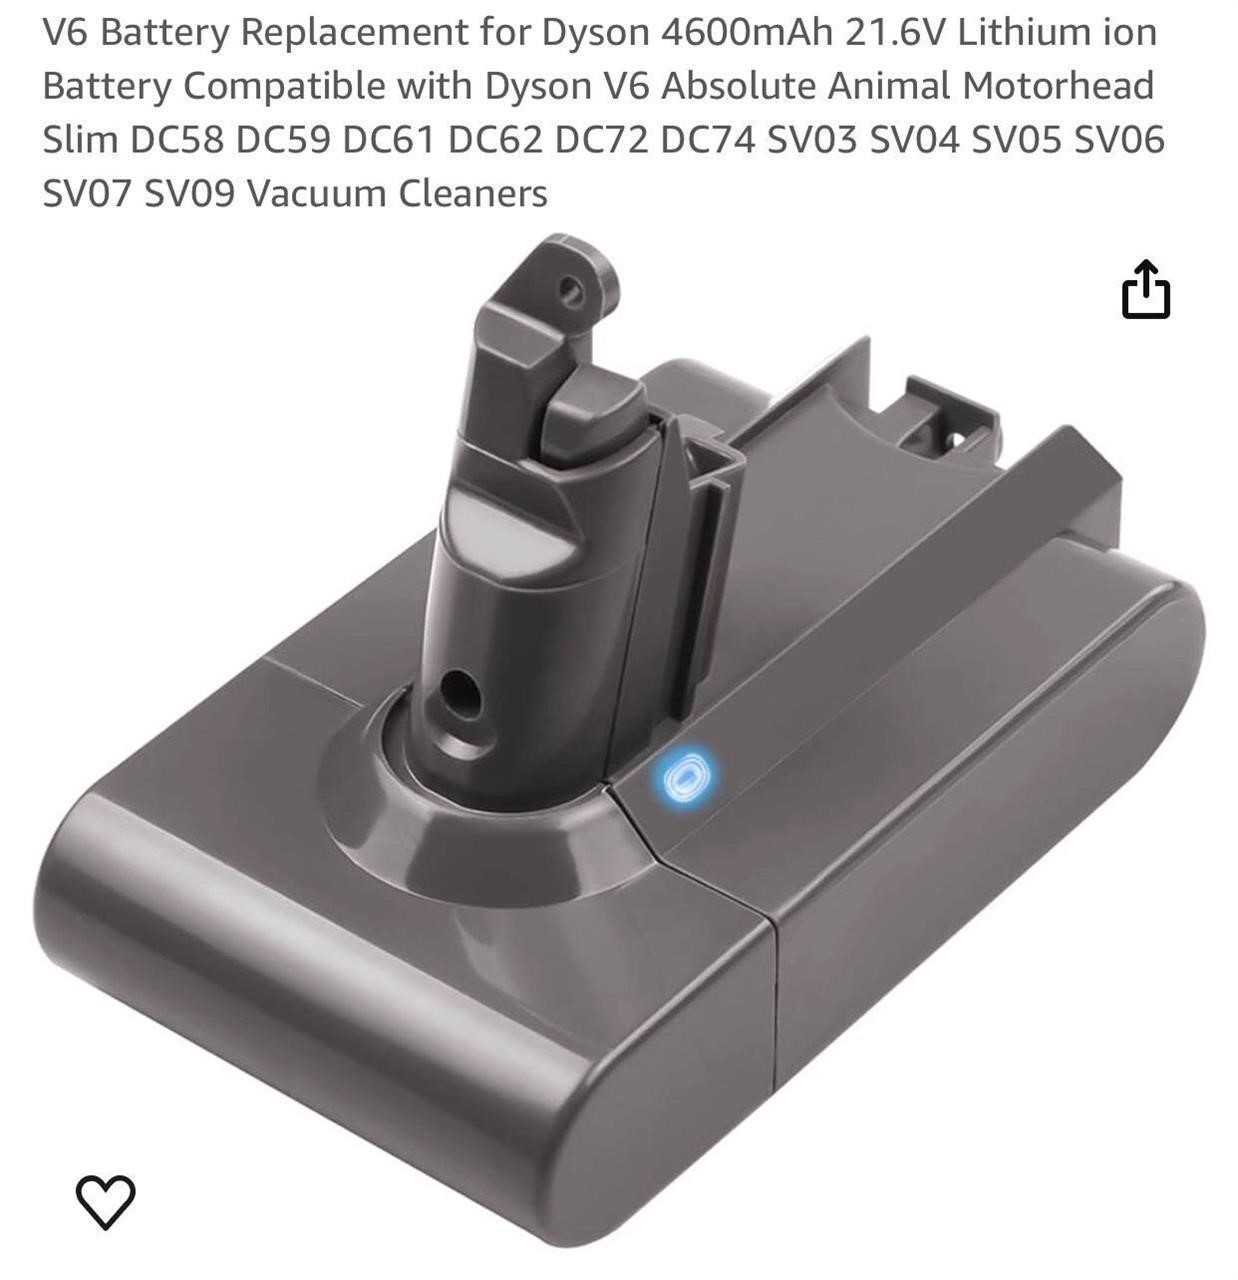 V6 Battery Replacement for Dyson